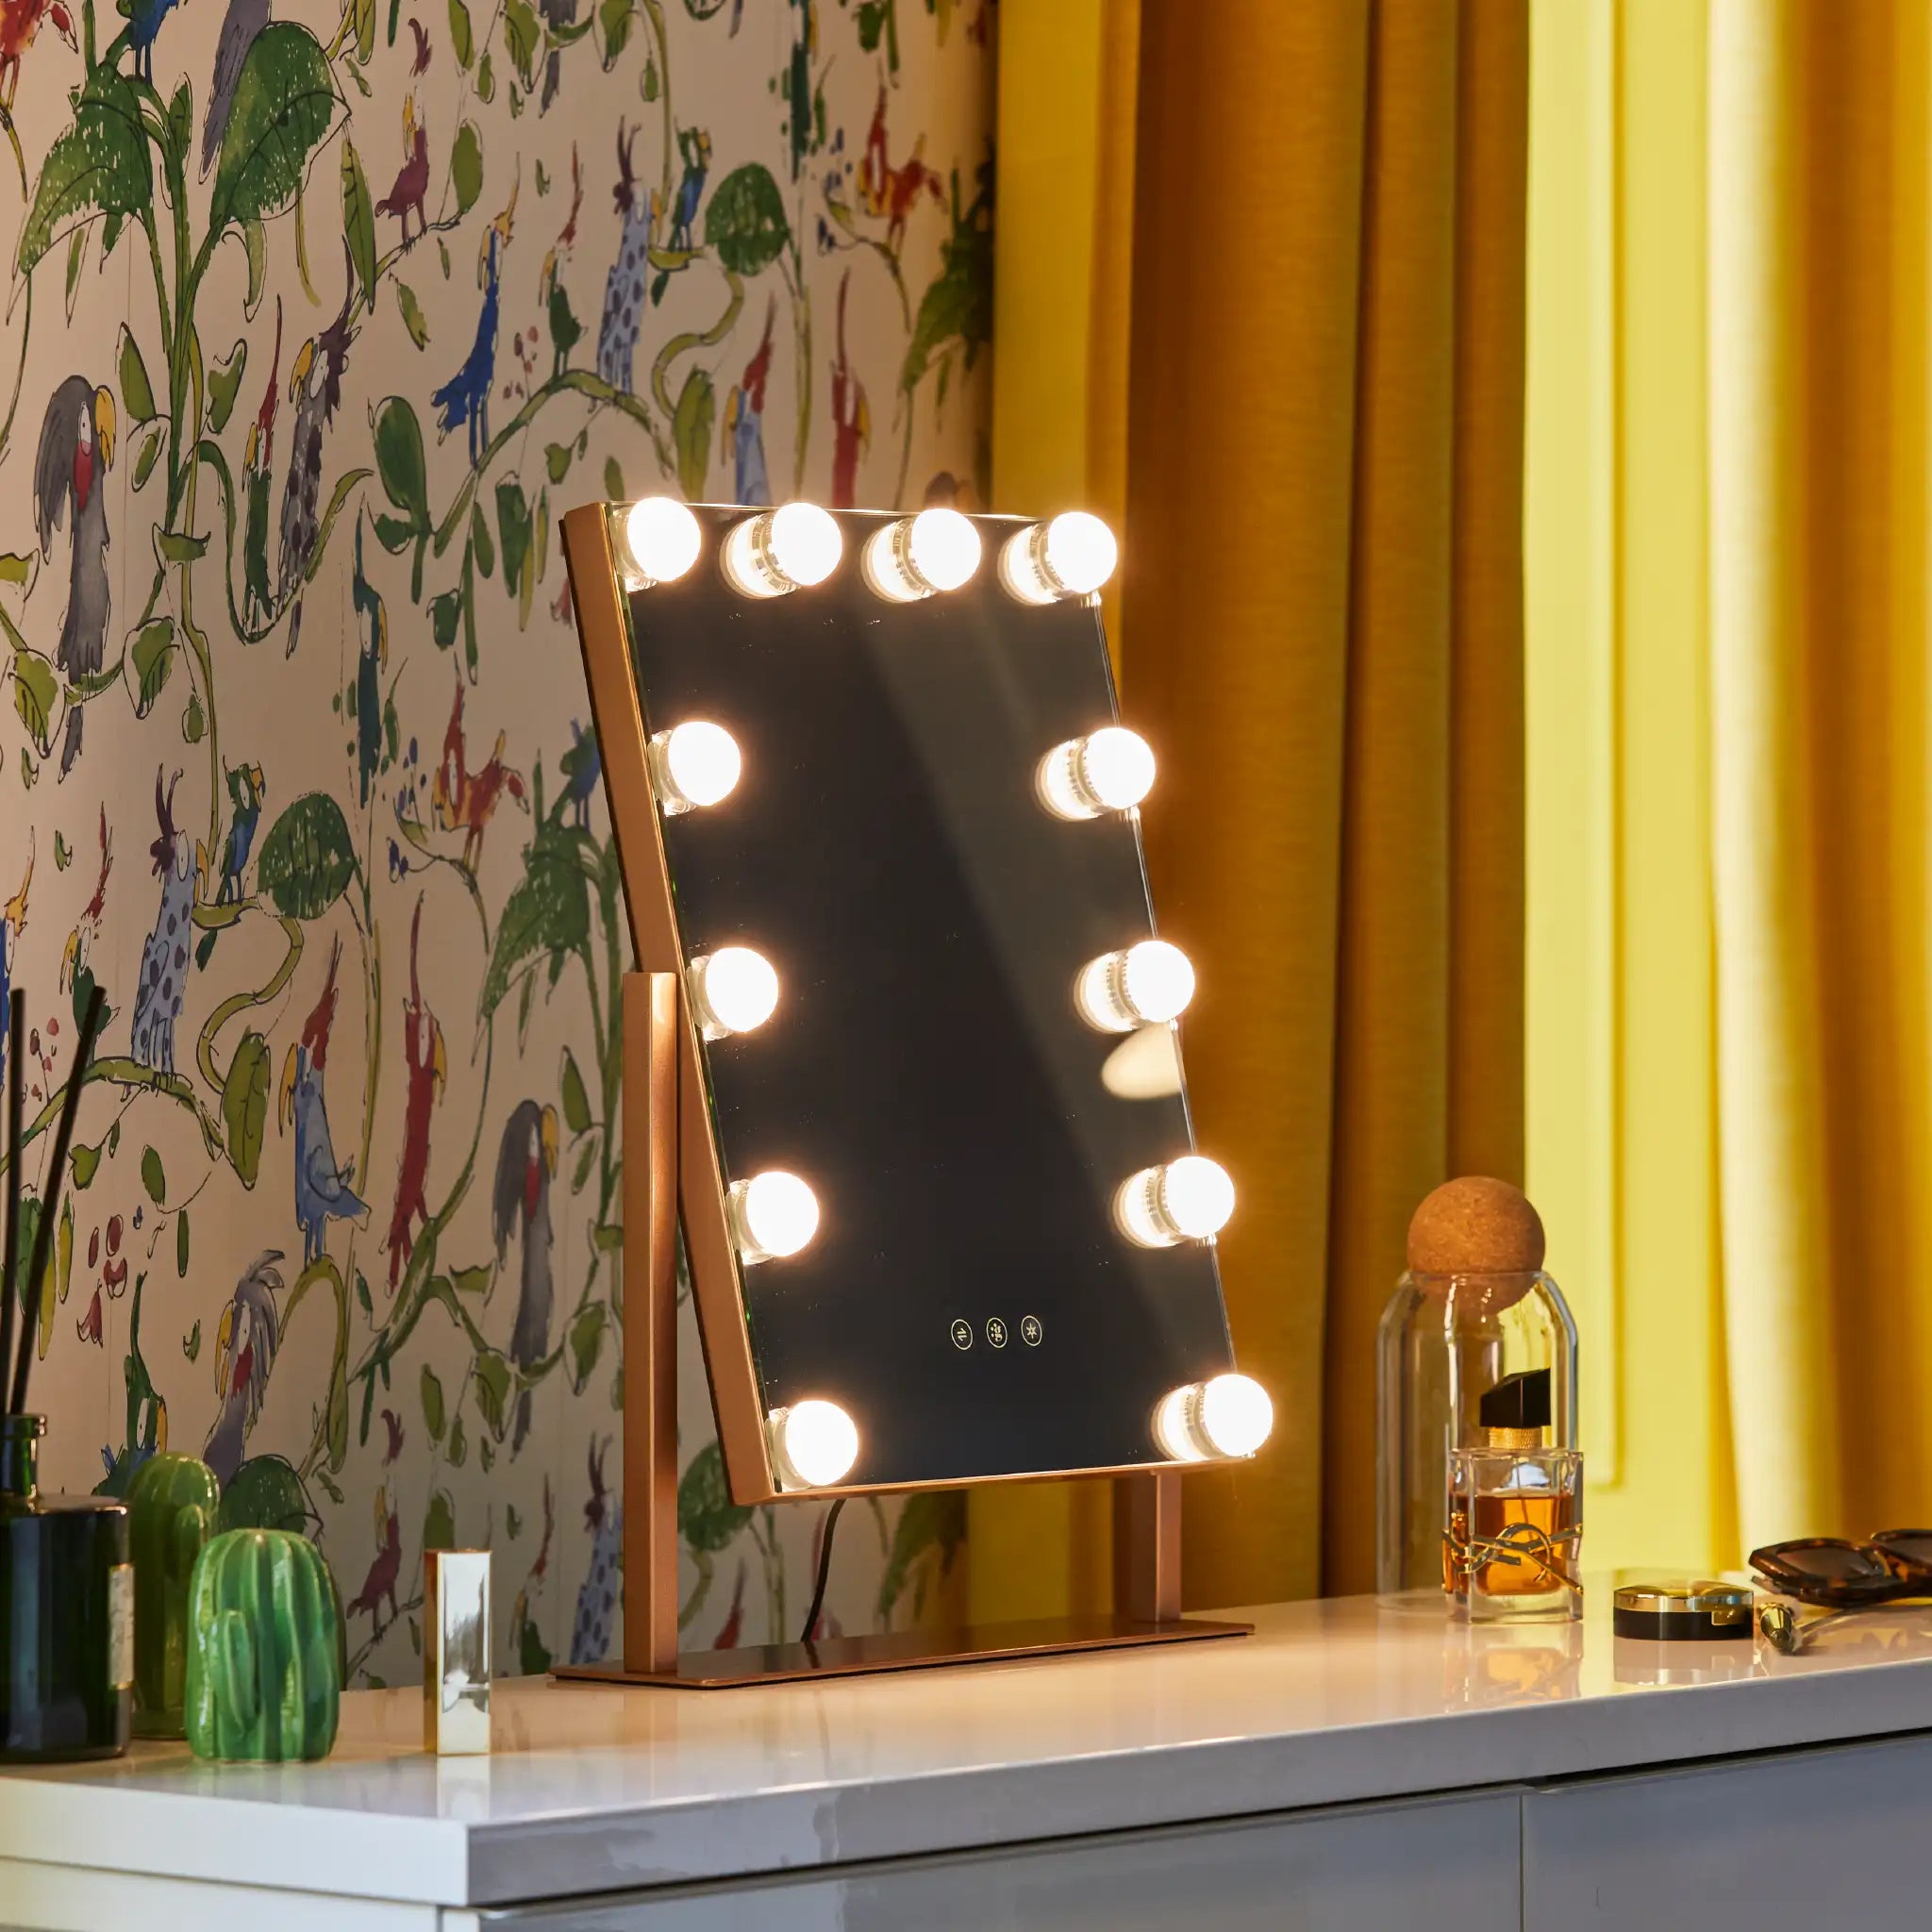 Roxy Hollywood Mirror with LED Lights